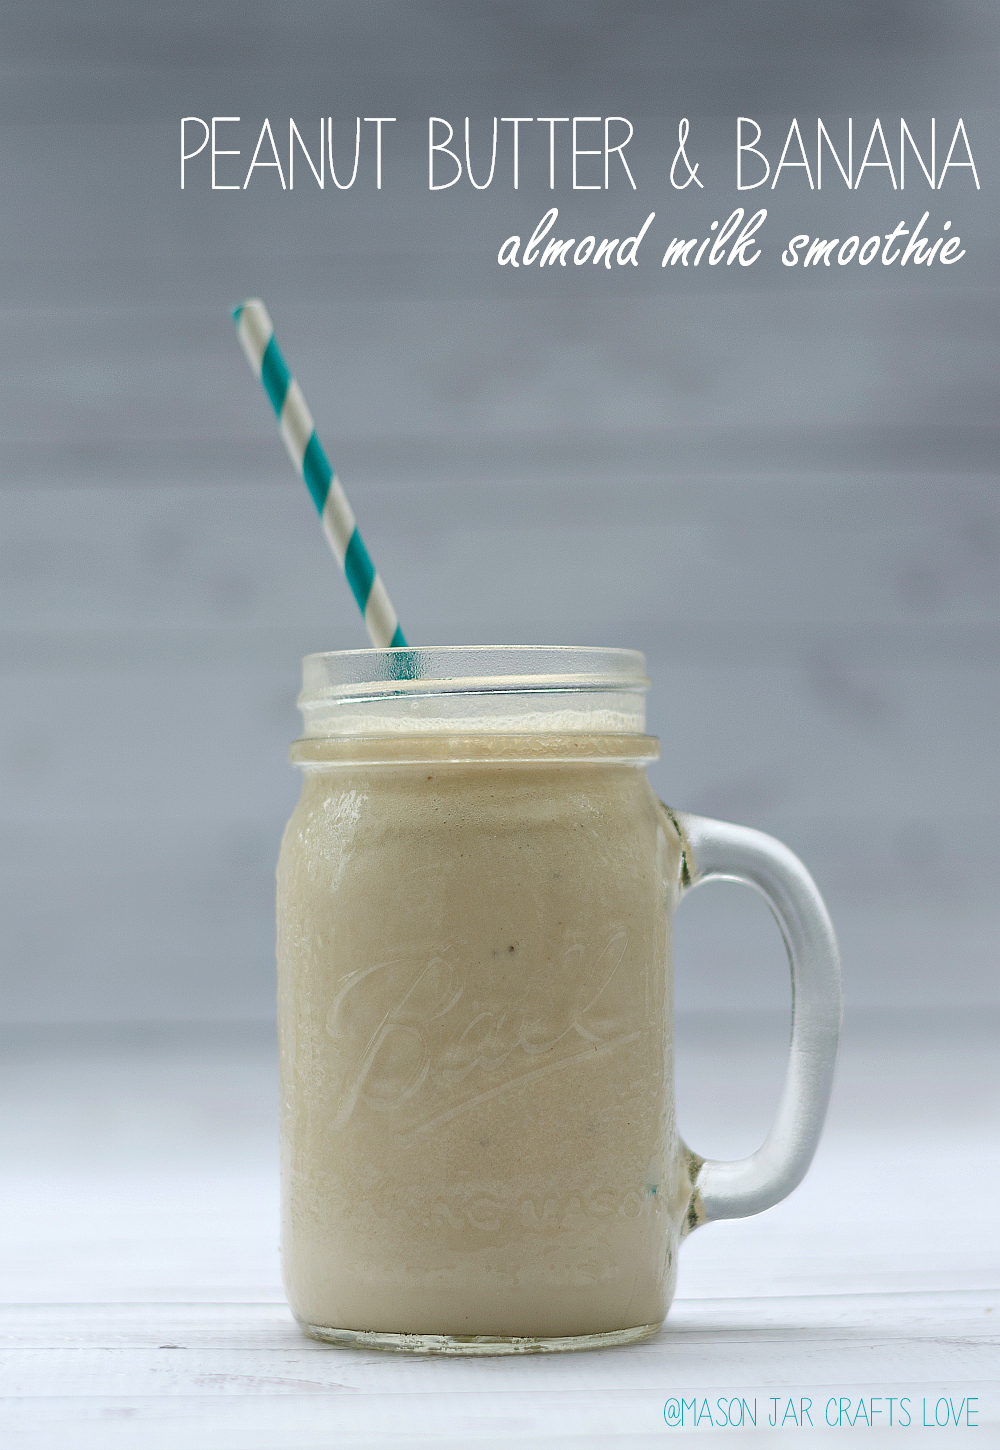 Healthy Smoothie Recipe with Almond Milk